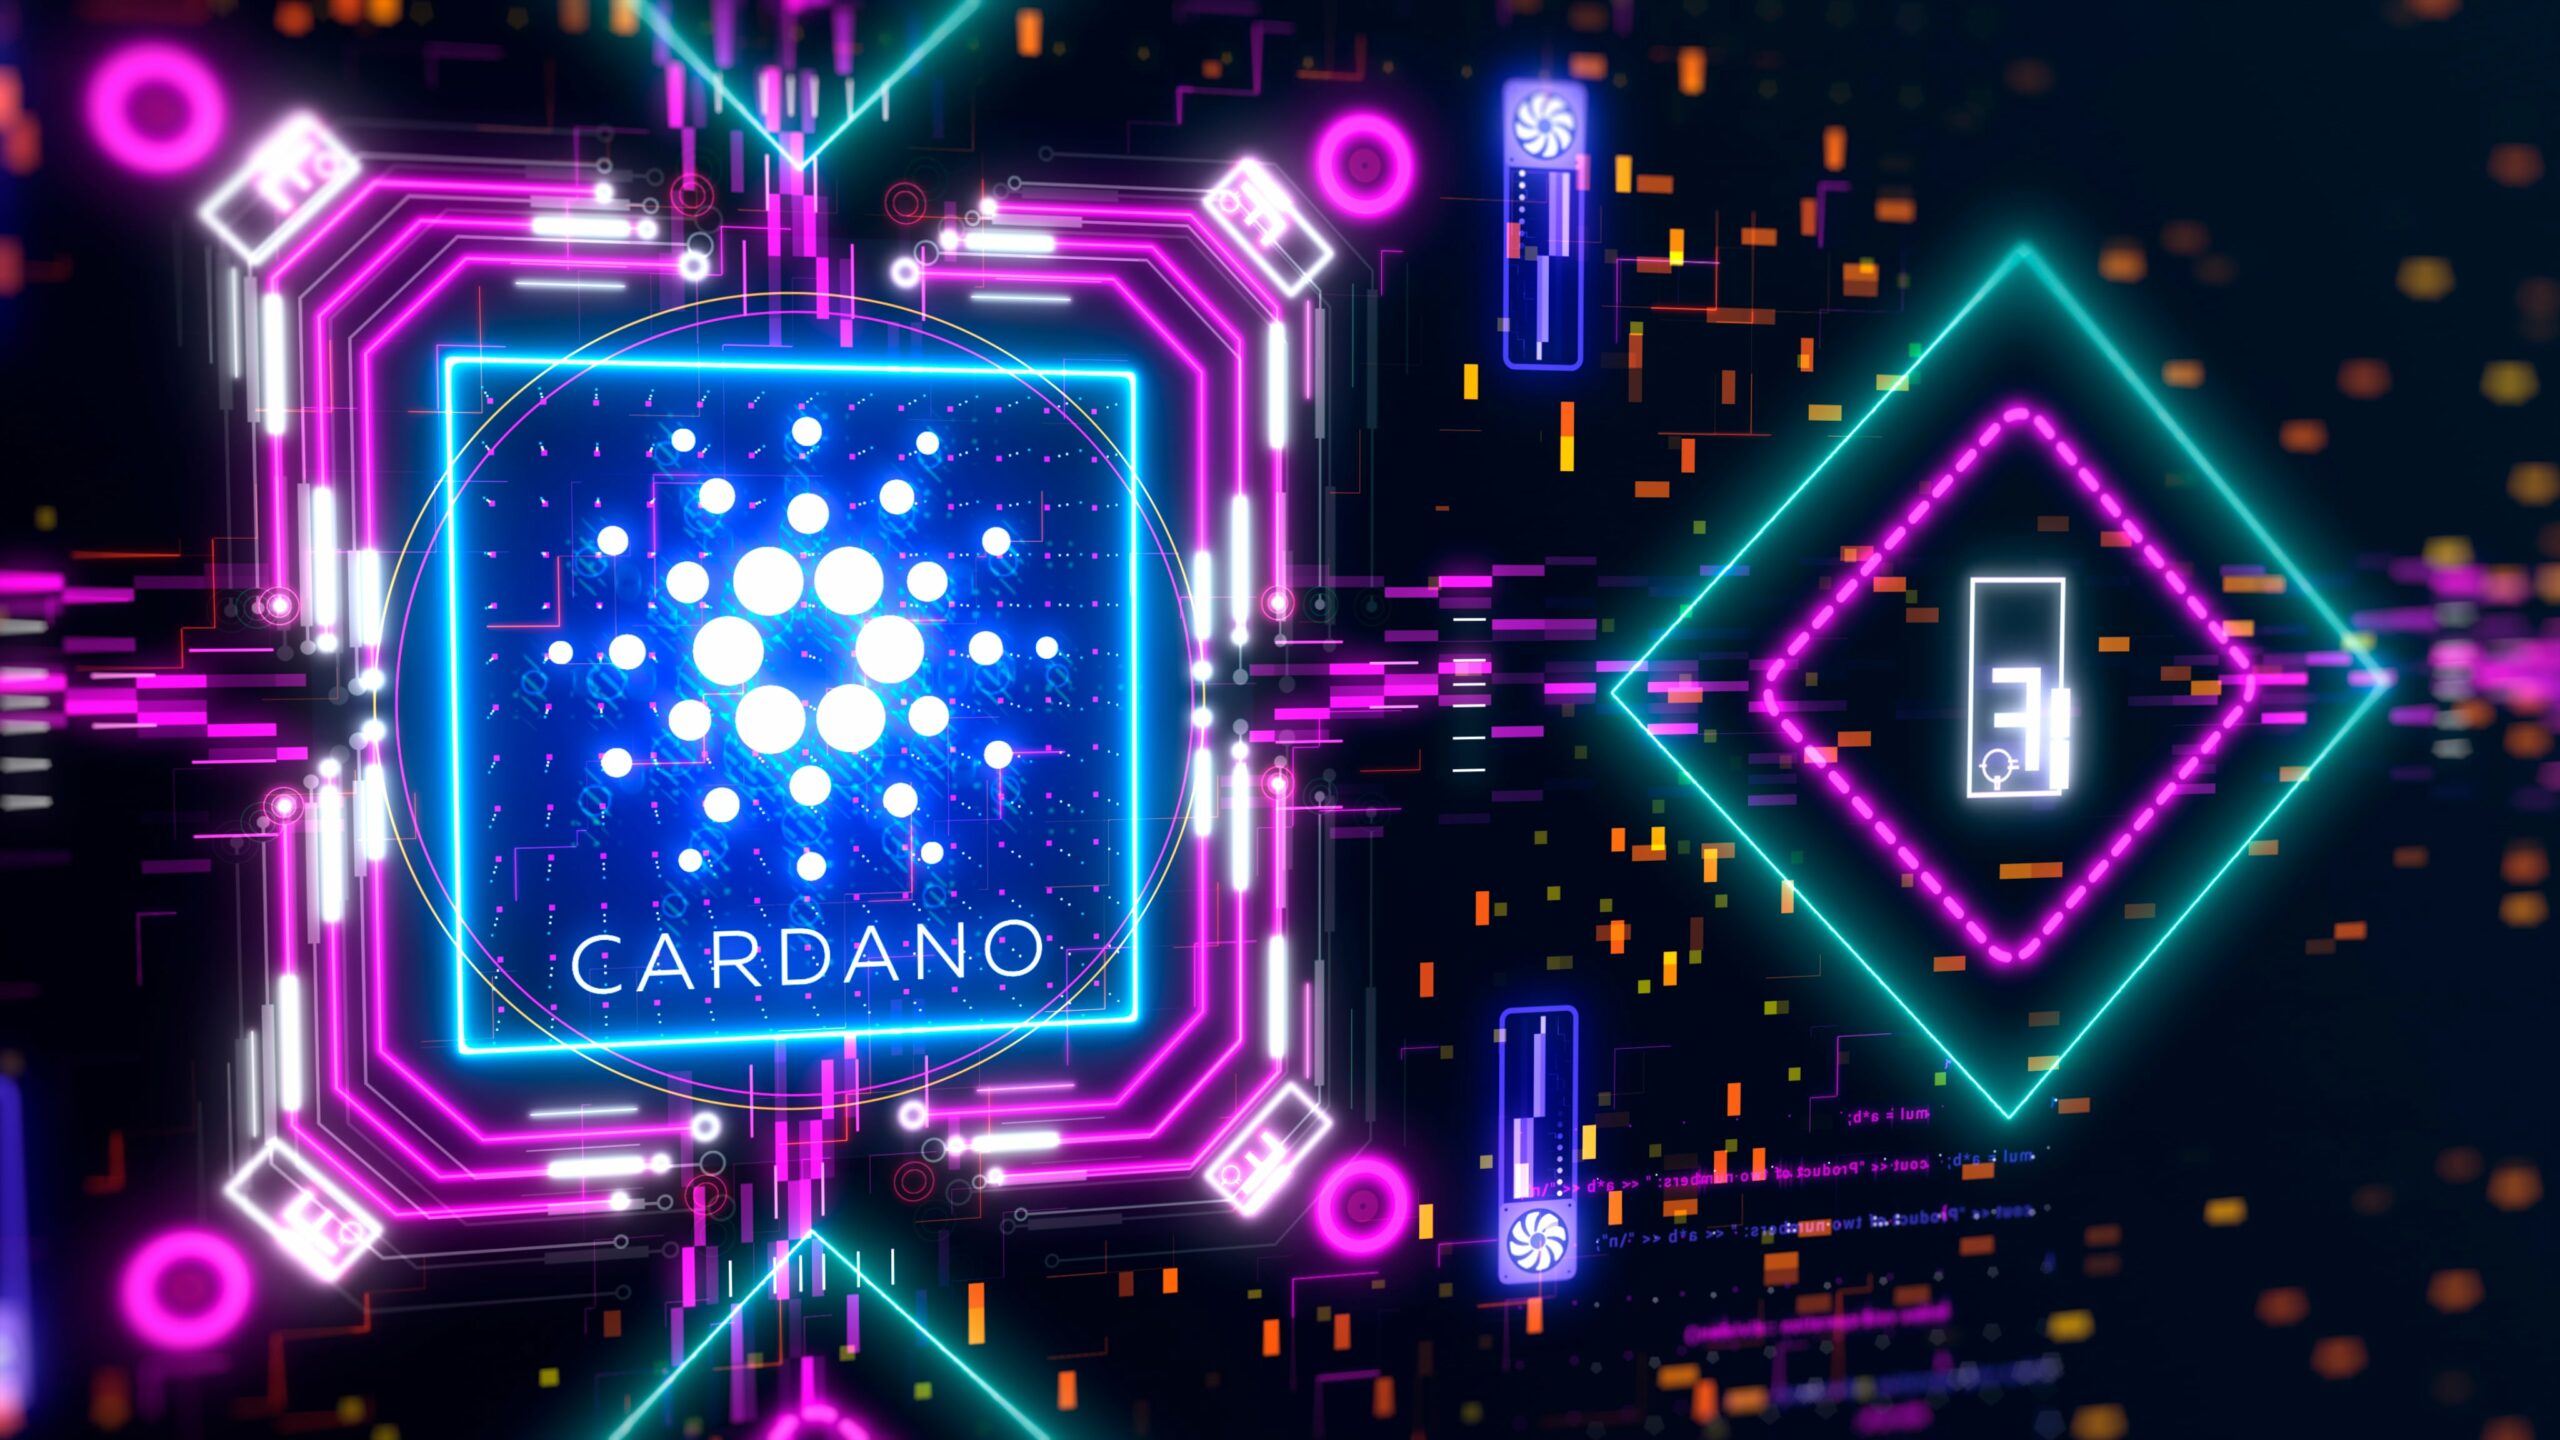 Cardano To Sink $100 Million into DeFi Projects Utilizing Its Ecosystem